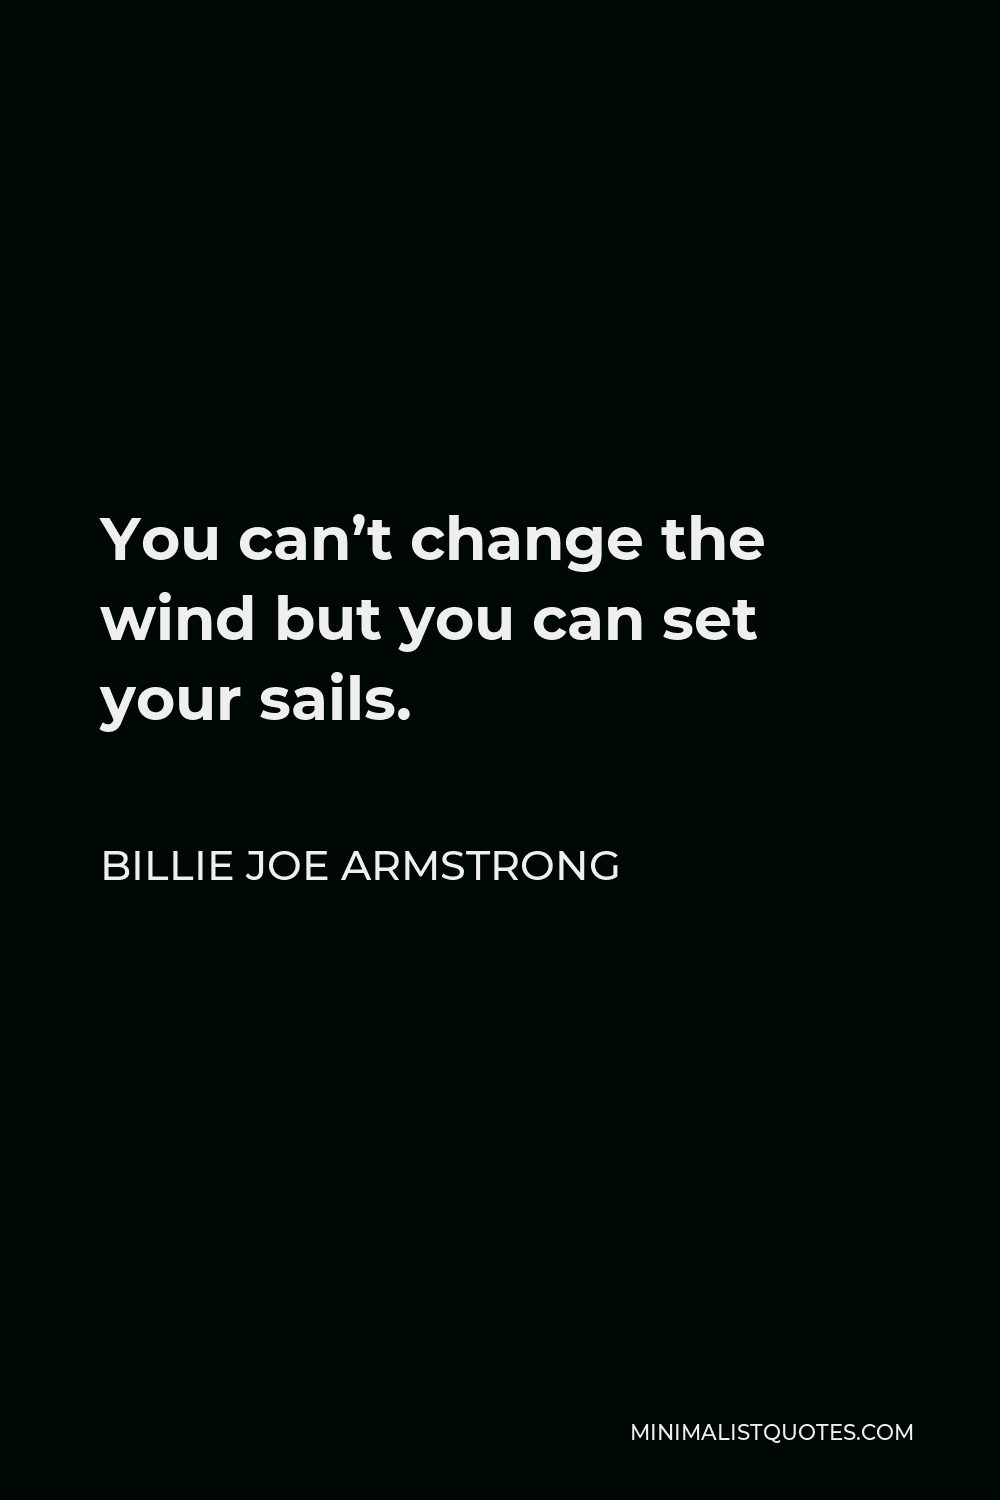 Billie Joe Armstrong Quote - You can’t change the wind but you can set your sails.